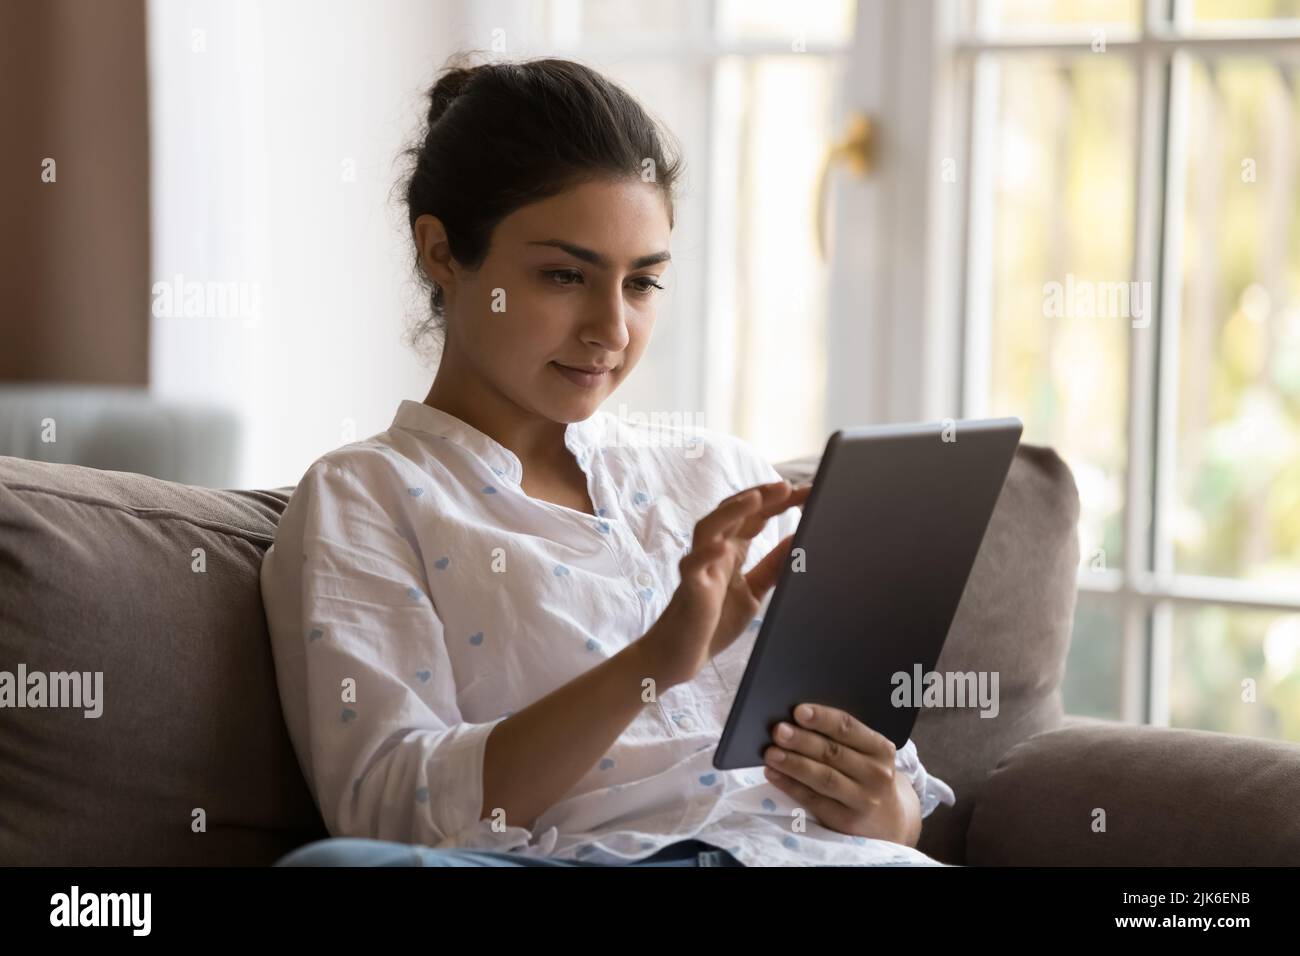 Focused young Indian tablet user woman relaxing on sofa Stock Photo